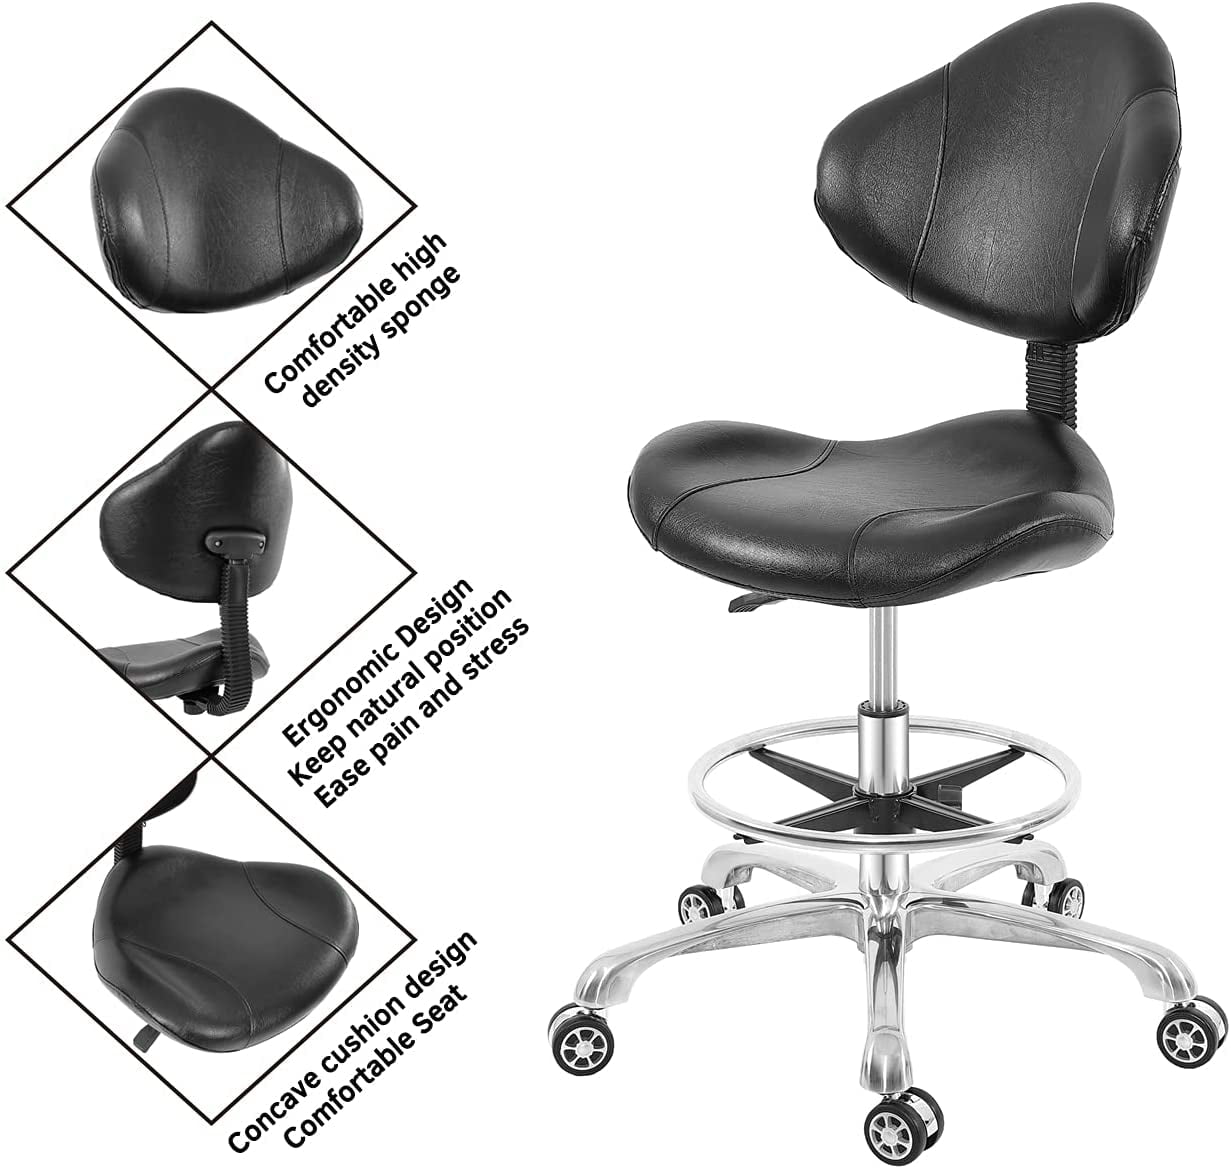 Kaleurrier Rolling Swivel Adjustable Heavy Duty Drafting Stool Chair for Salon,Medical,Office and Home uses,with Wheels and Back Black 